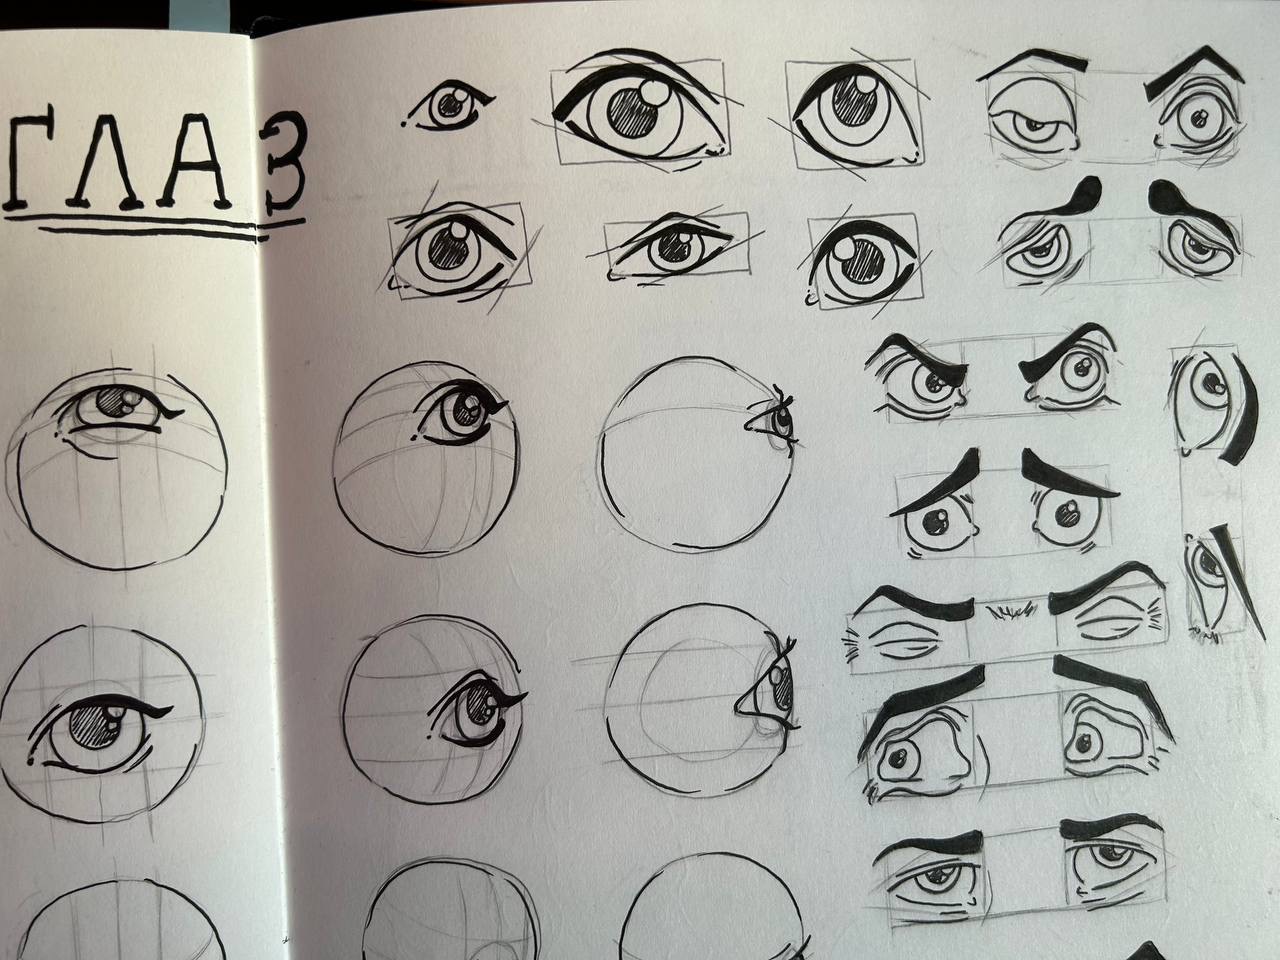 Drawing Eyes at Different Angles